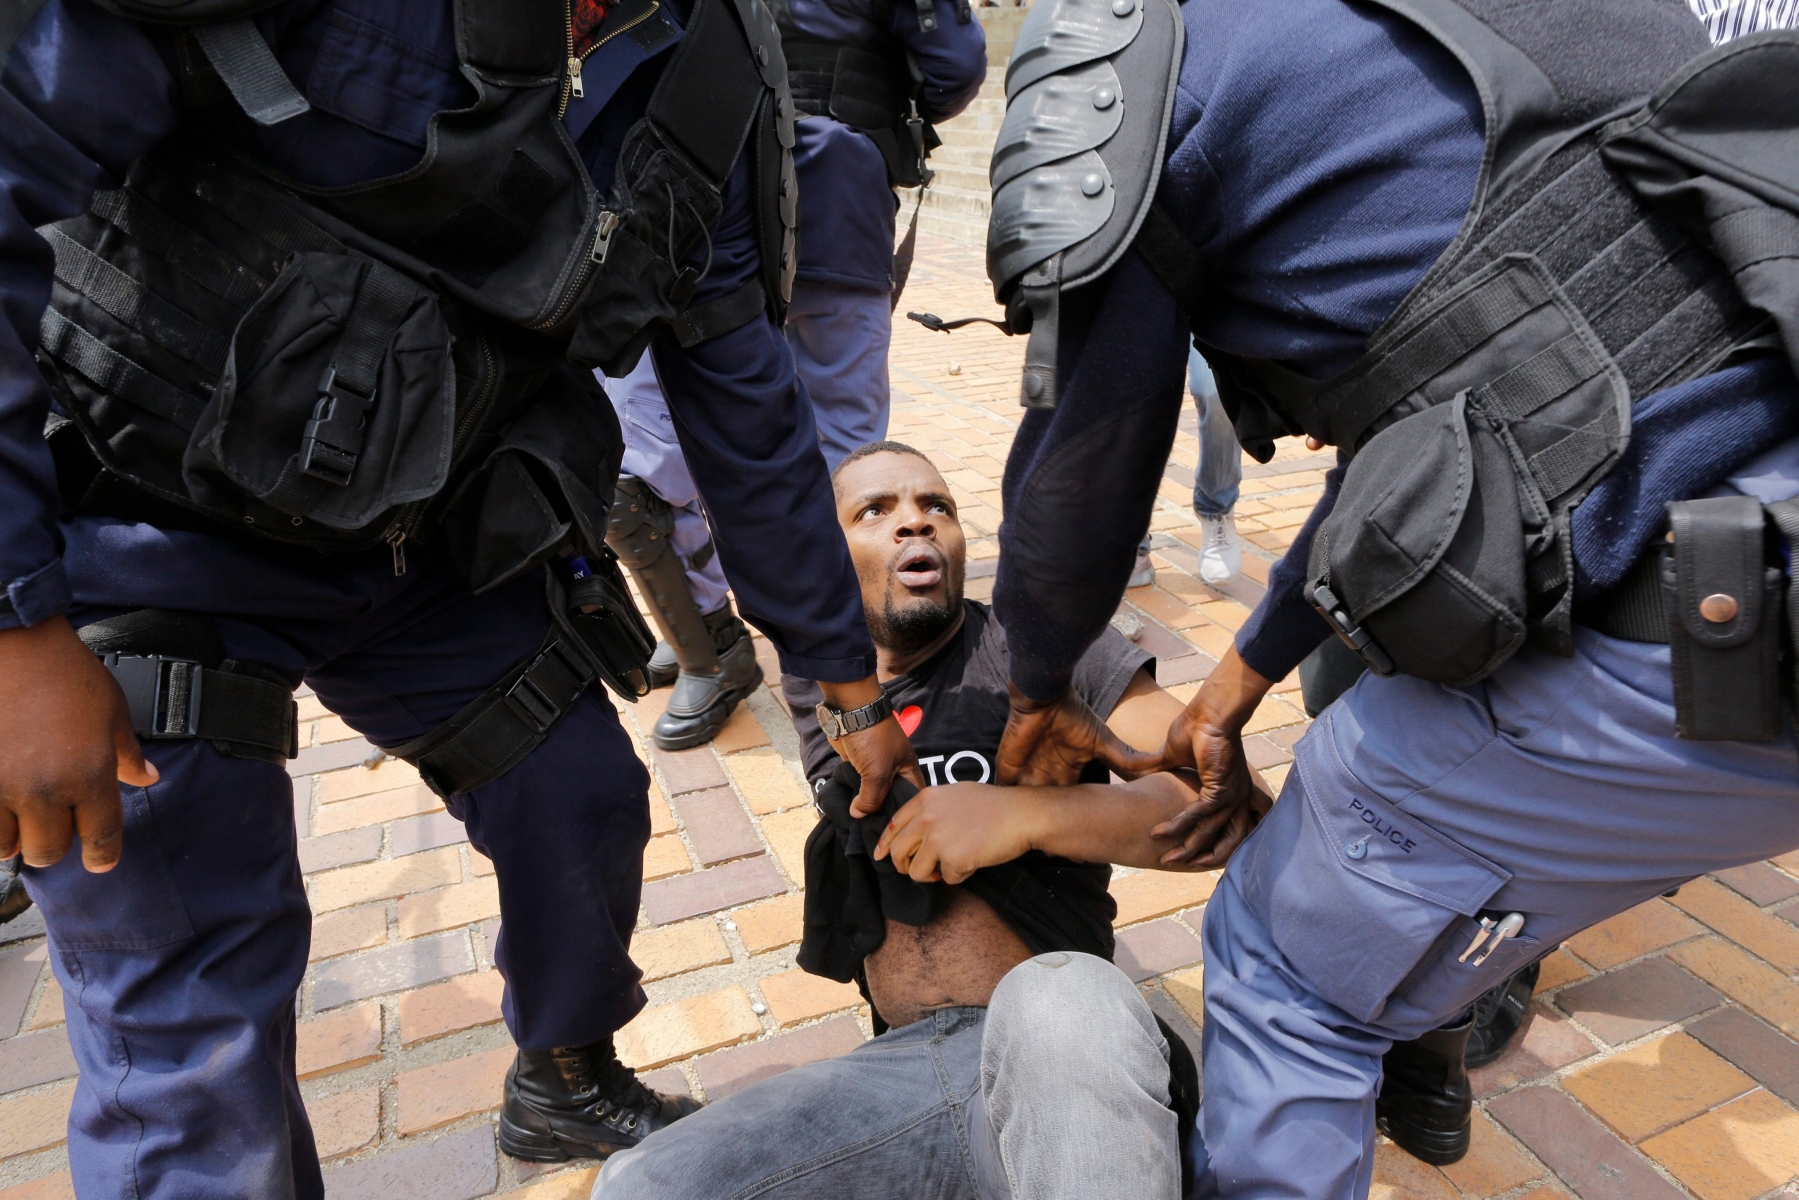 epa05569747 Police forces attempt to arrest a student leader as ongoing protests continue against the cost of higher education at the University of the Witwatersrand in Johannesburg, South Africa, 04 October 2016. Fees protests continued at universities across the country with private security companies being employed to keep order. Some eight students have been arrested this week by South African Police Services. The ministry of education announced a 8% increase of university fees following calls by student demonstrators of a 0% increase.  EPA/KIM LUDBROOK SOUTH AFRICA STUDENT PROTEST